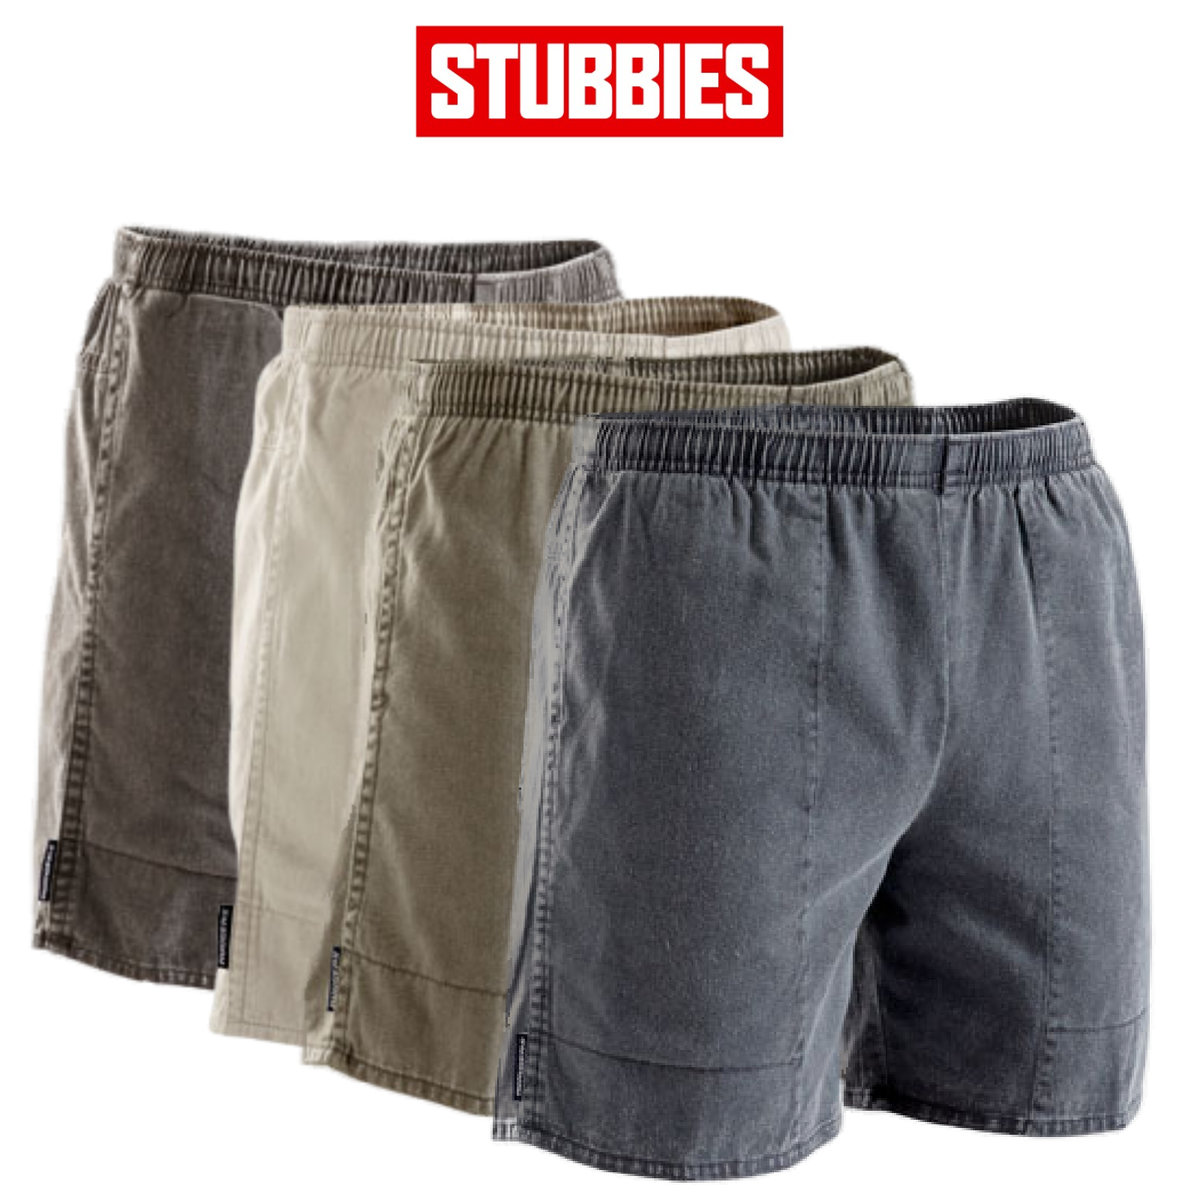 Stubbies Ruggers Mens Pigment Dyed Shorts Drawcord Cotton Elastic Work SE4200